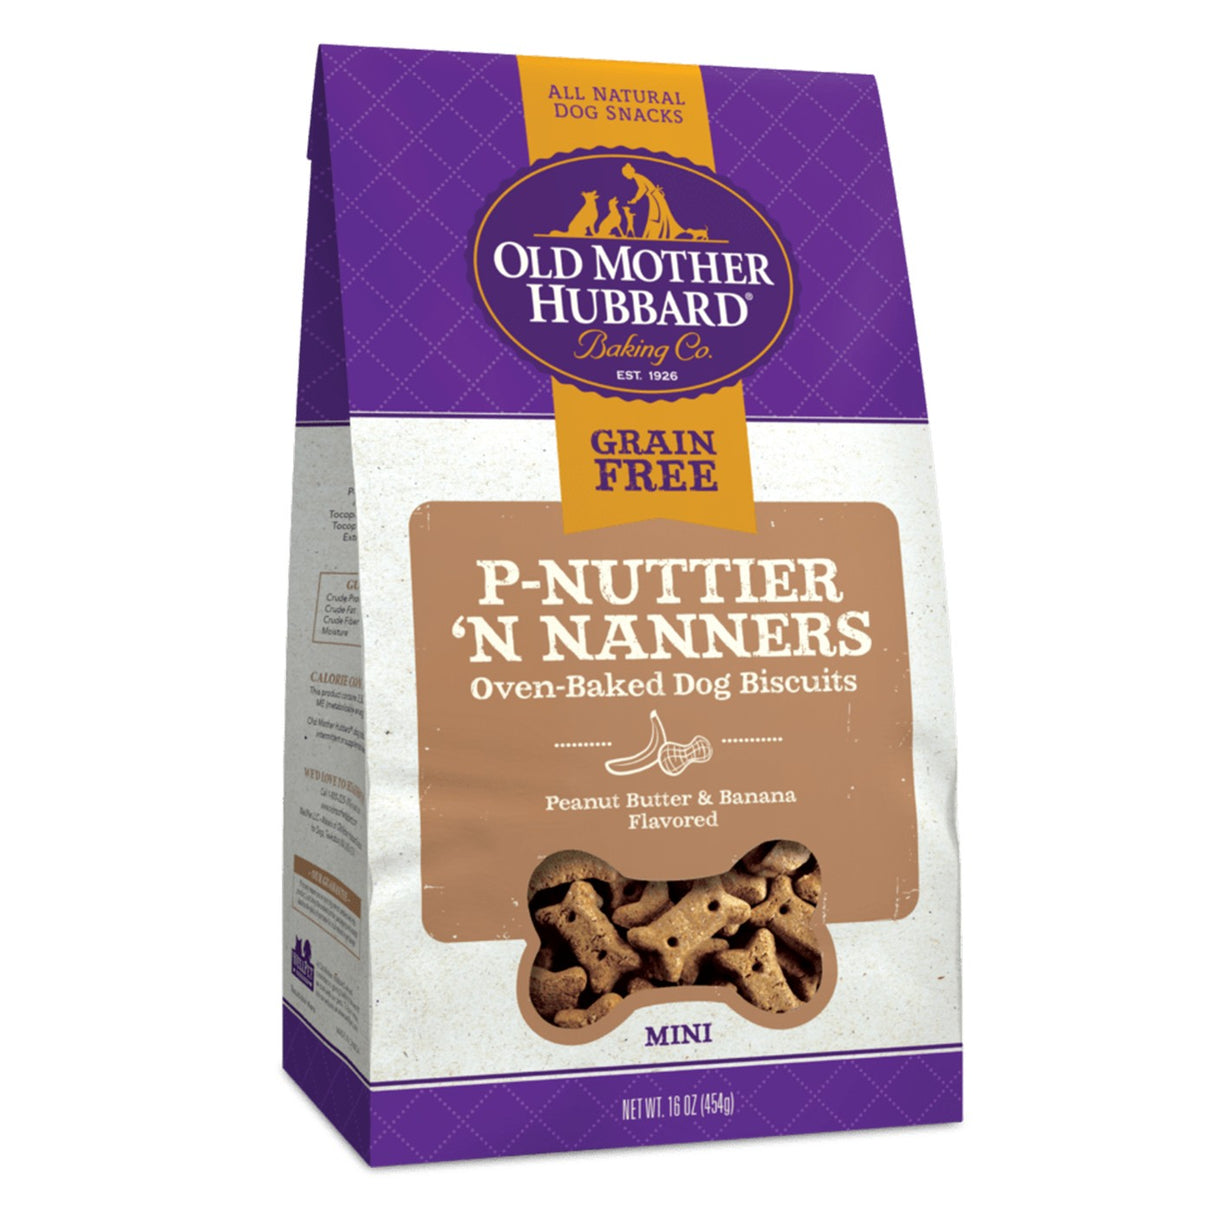 Old Mother Hubbard P-Nuttier N Nanners Mini Dog Biscuits